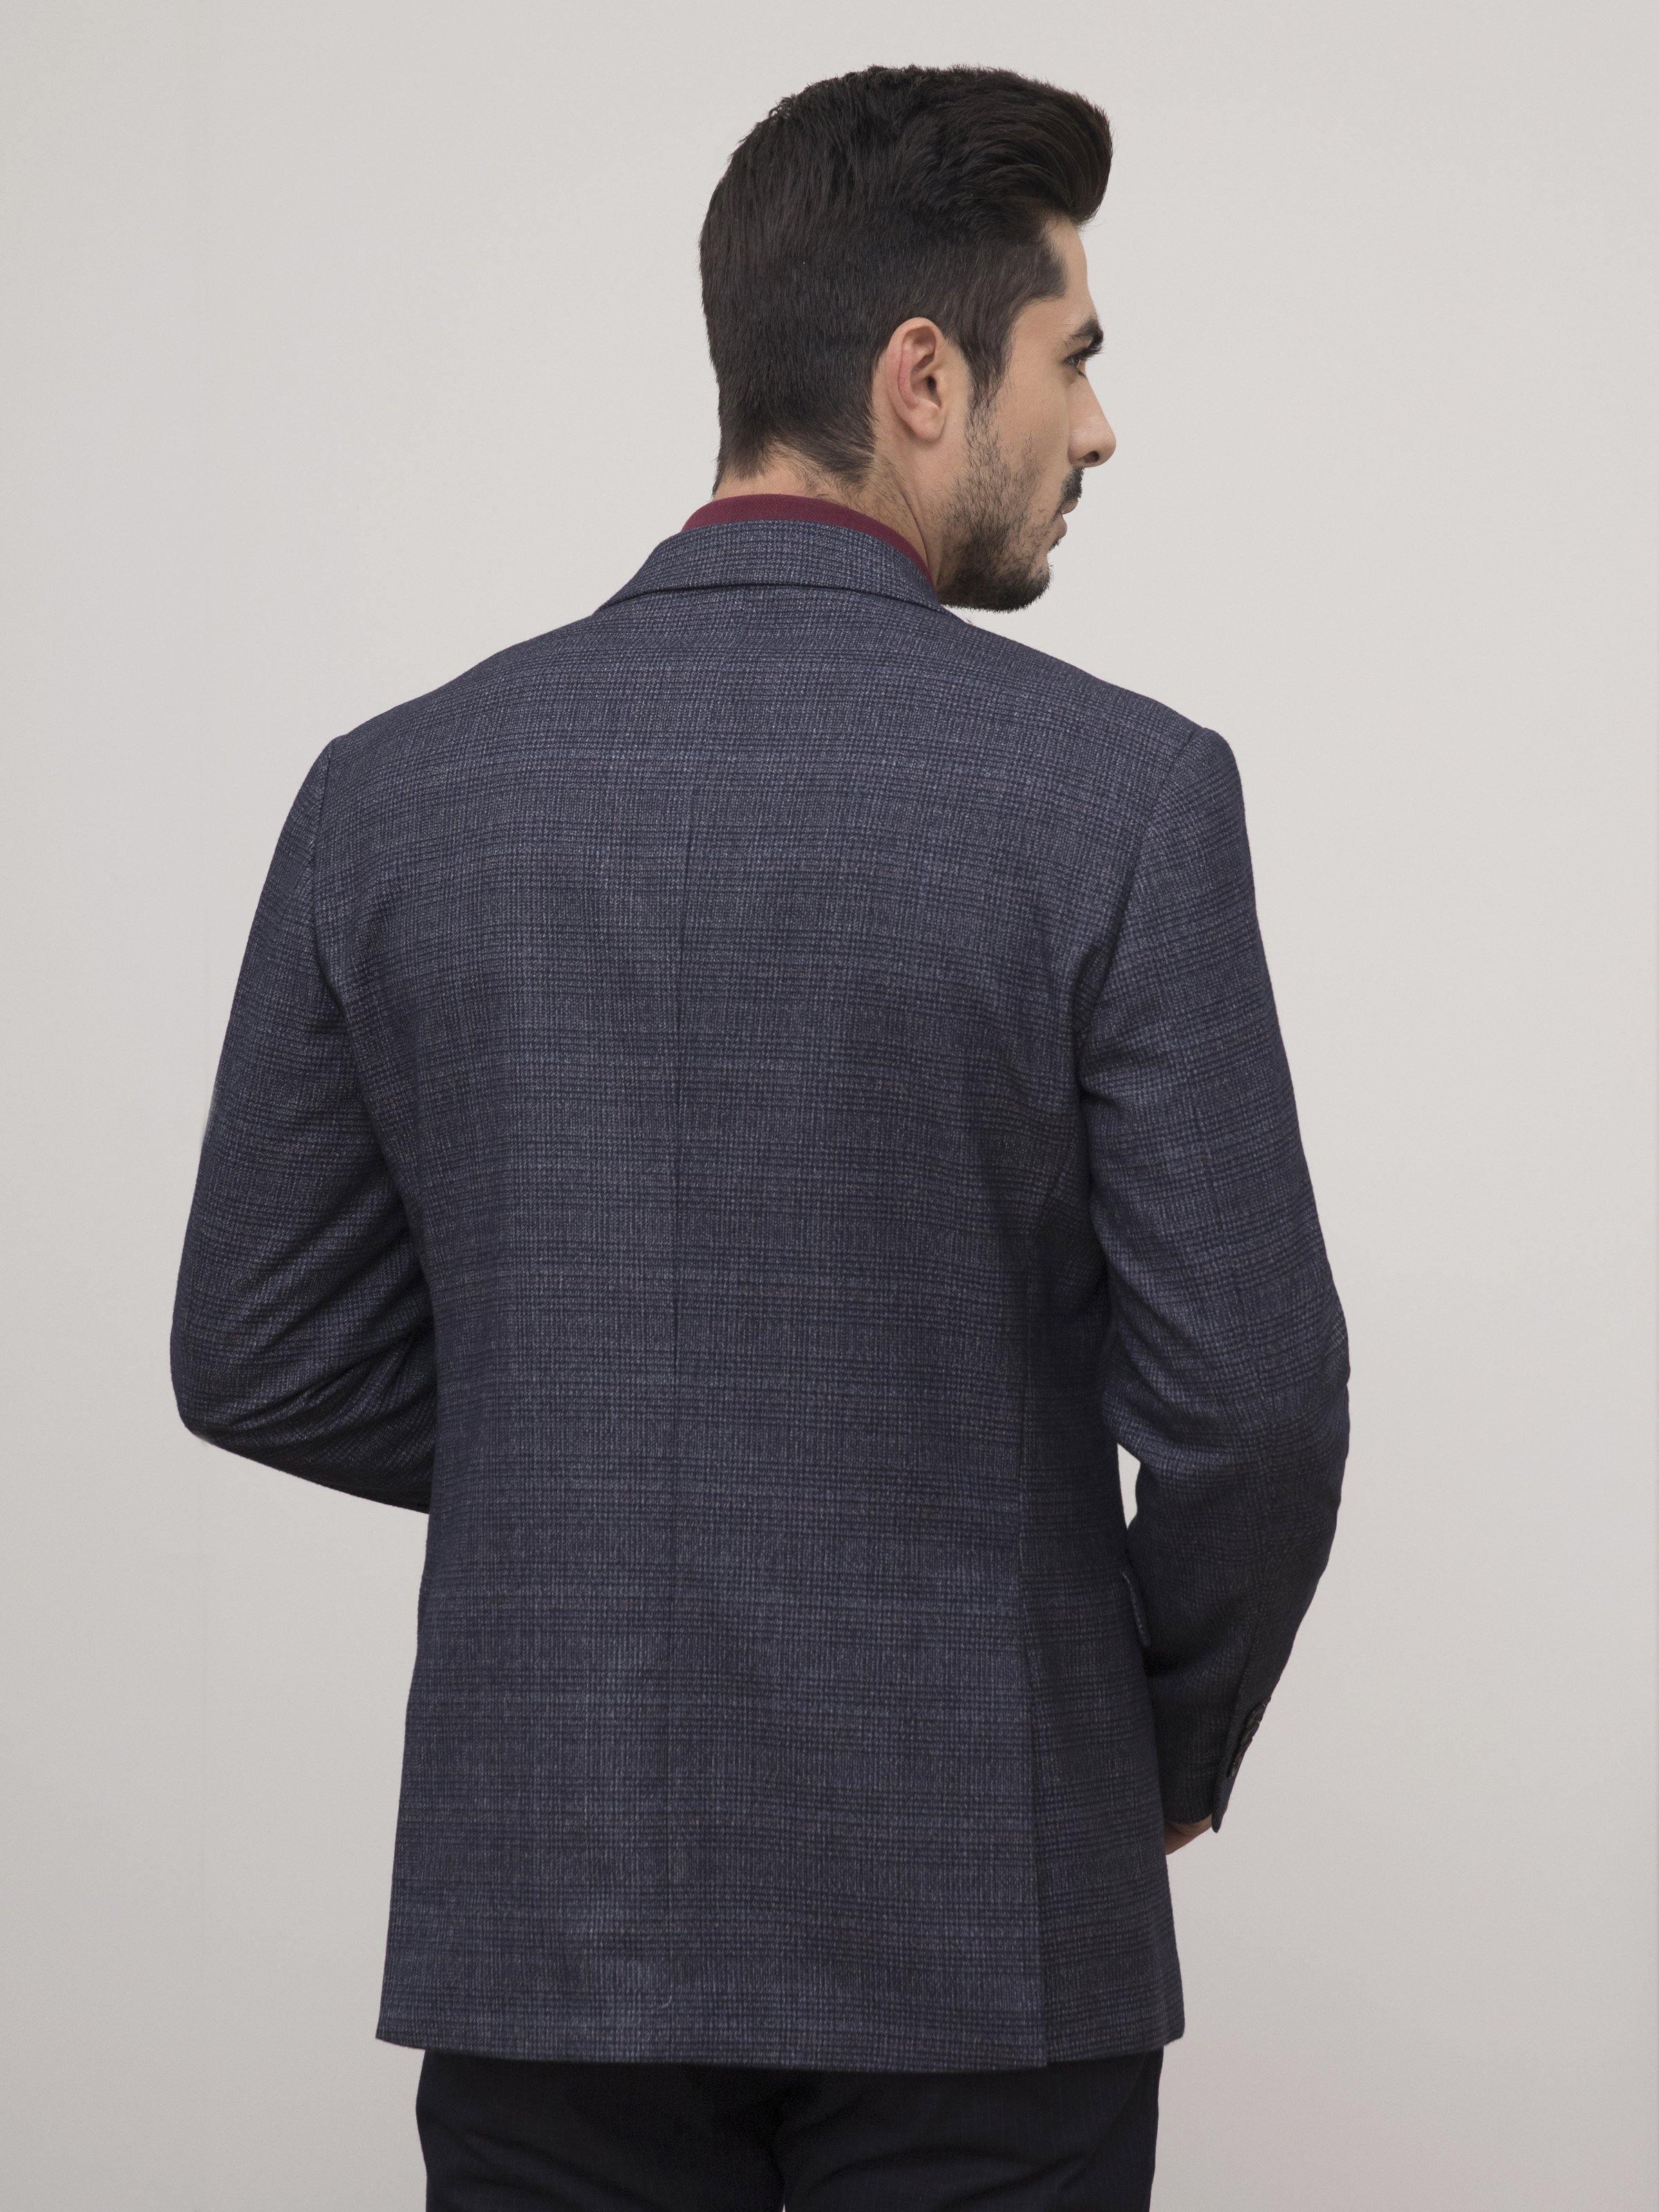 CASUAL COAT SMART FIT GREY BLUE at Charcoal Clothing